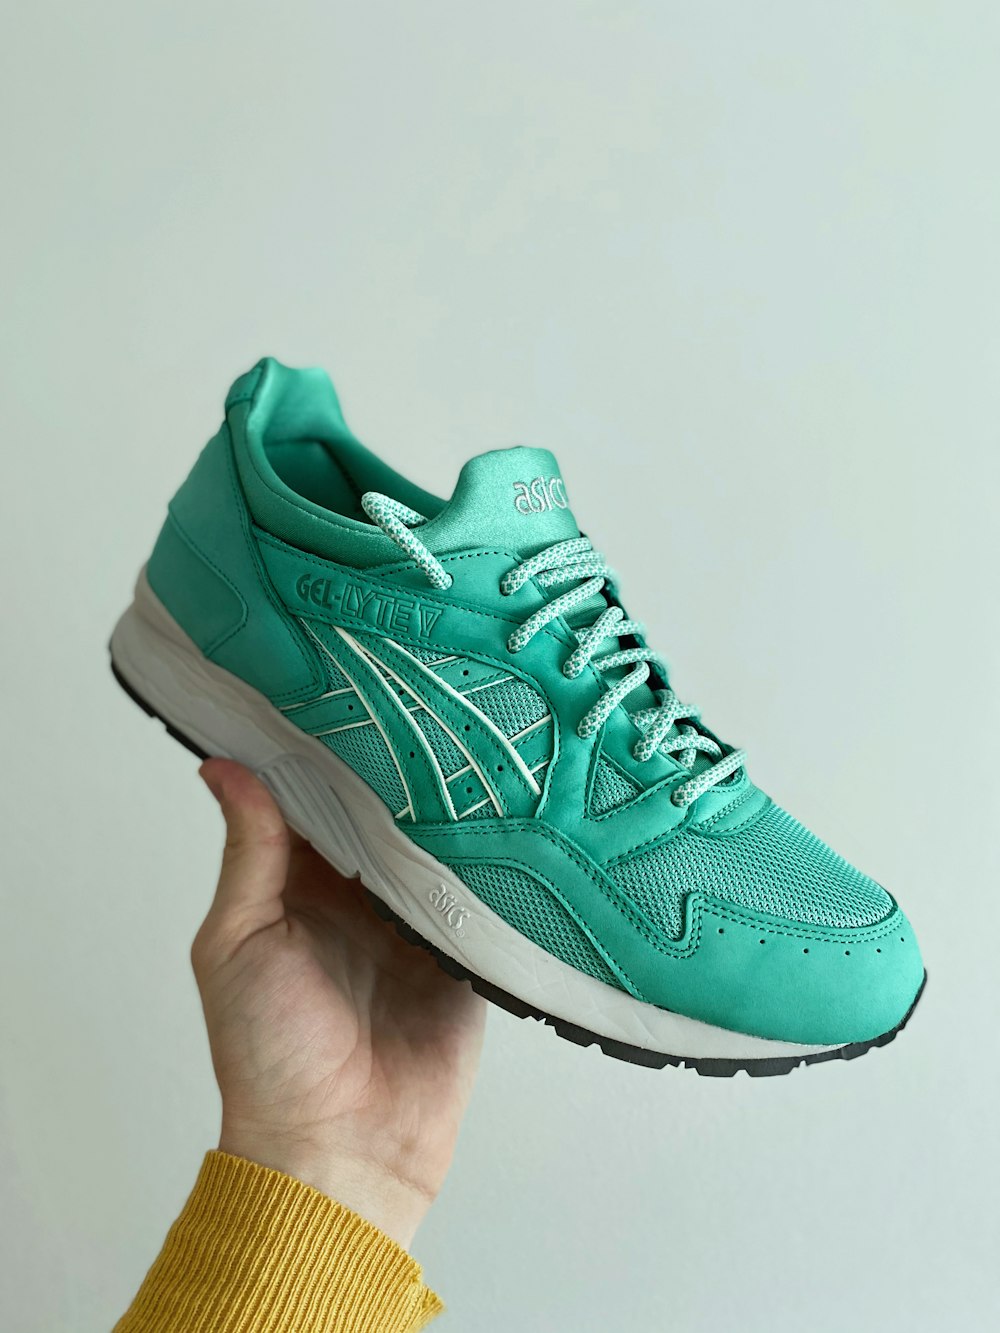 Asics Pictures | Download Free Images on Unsplash